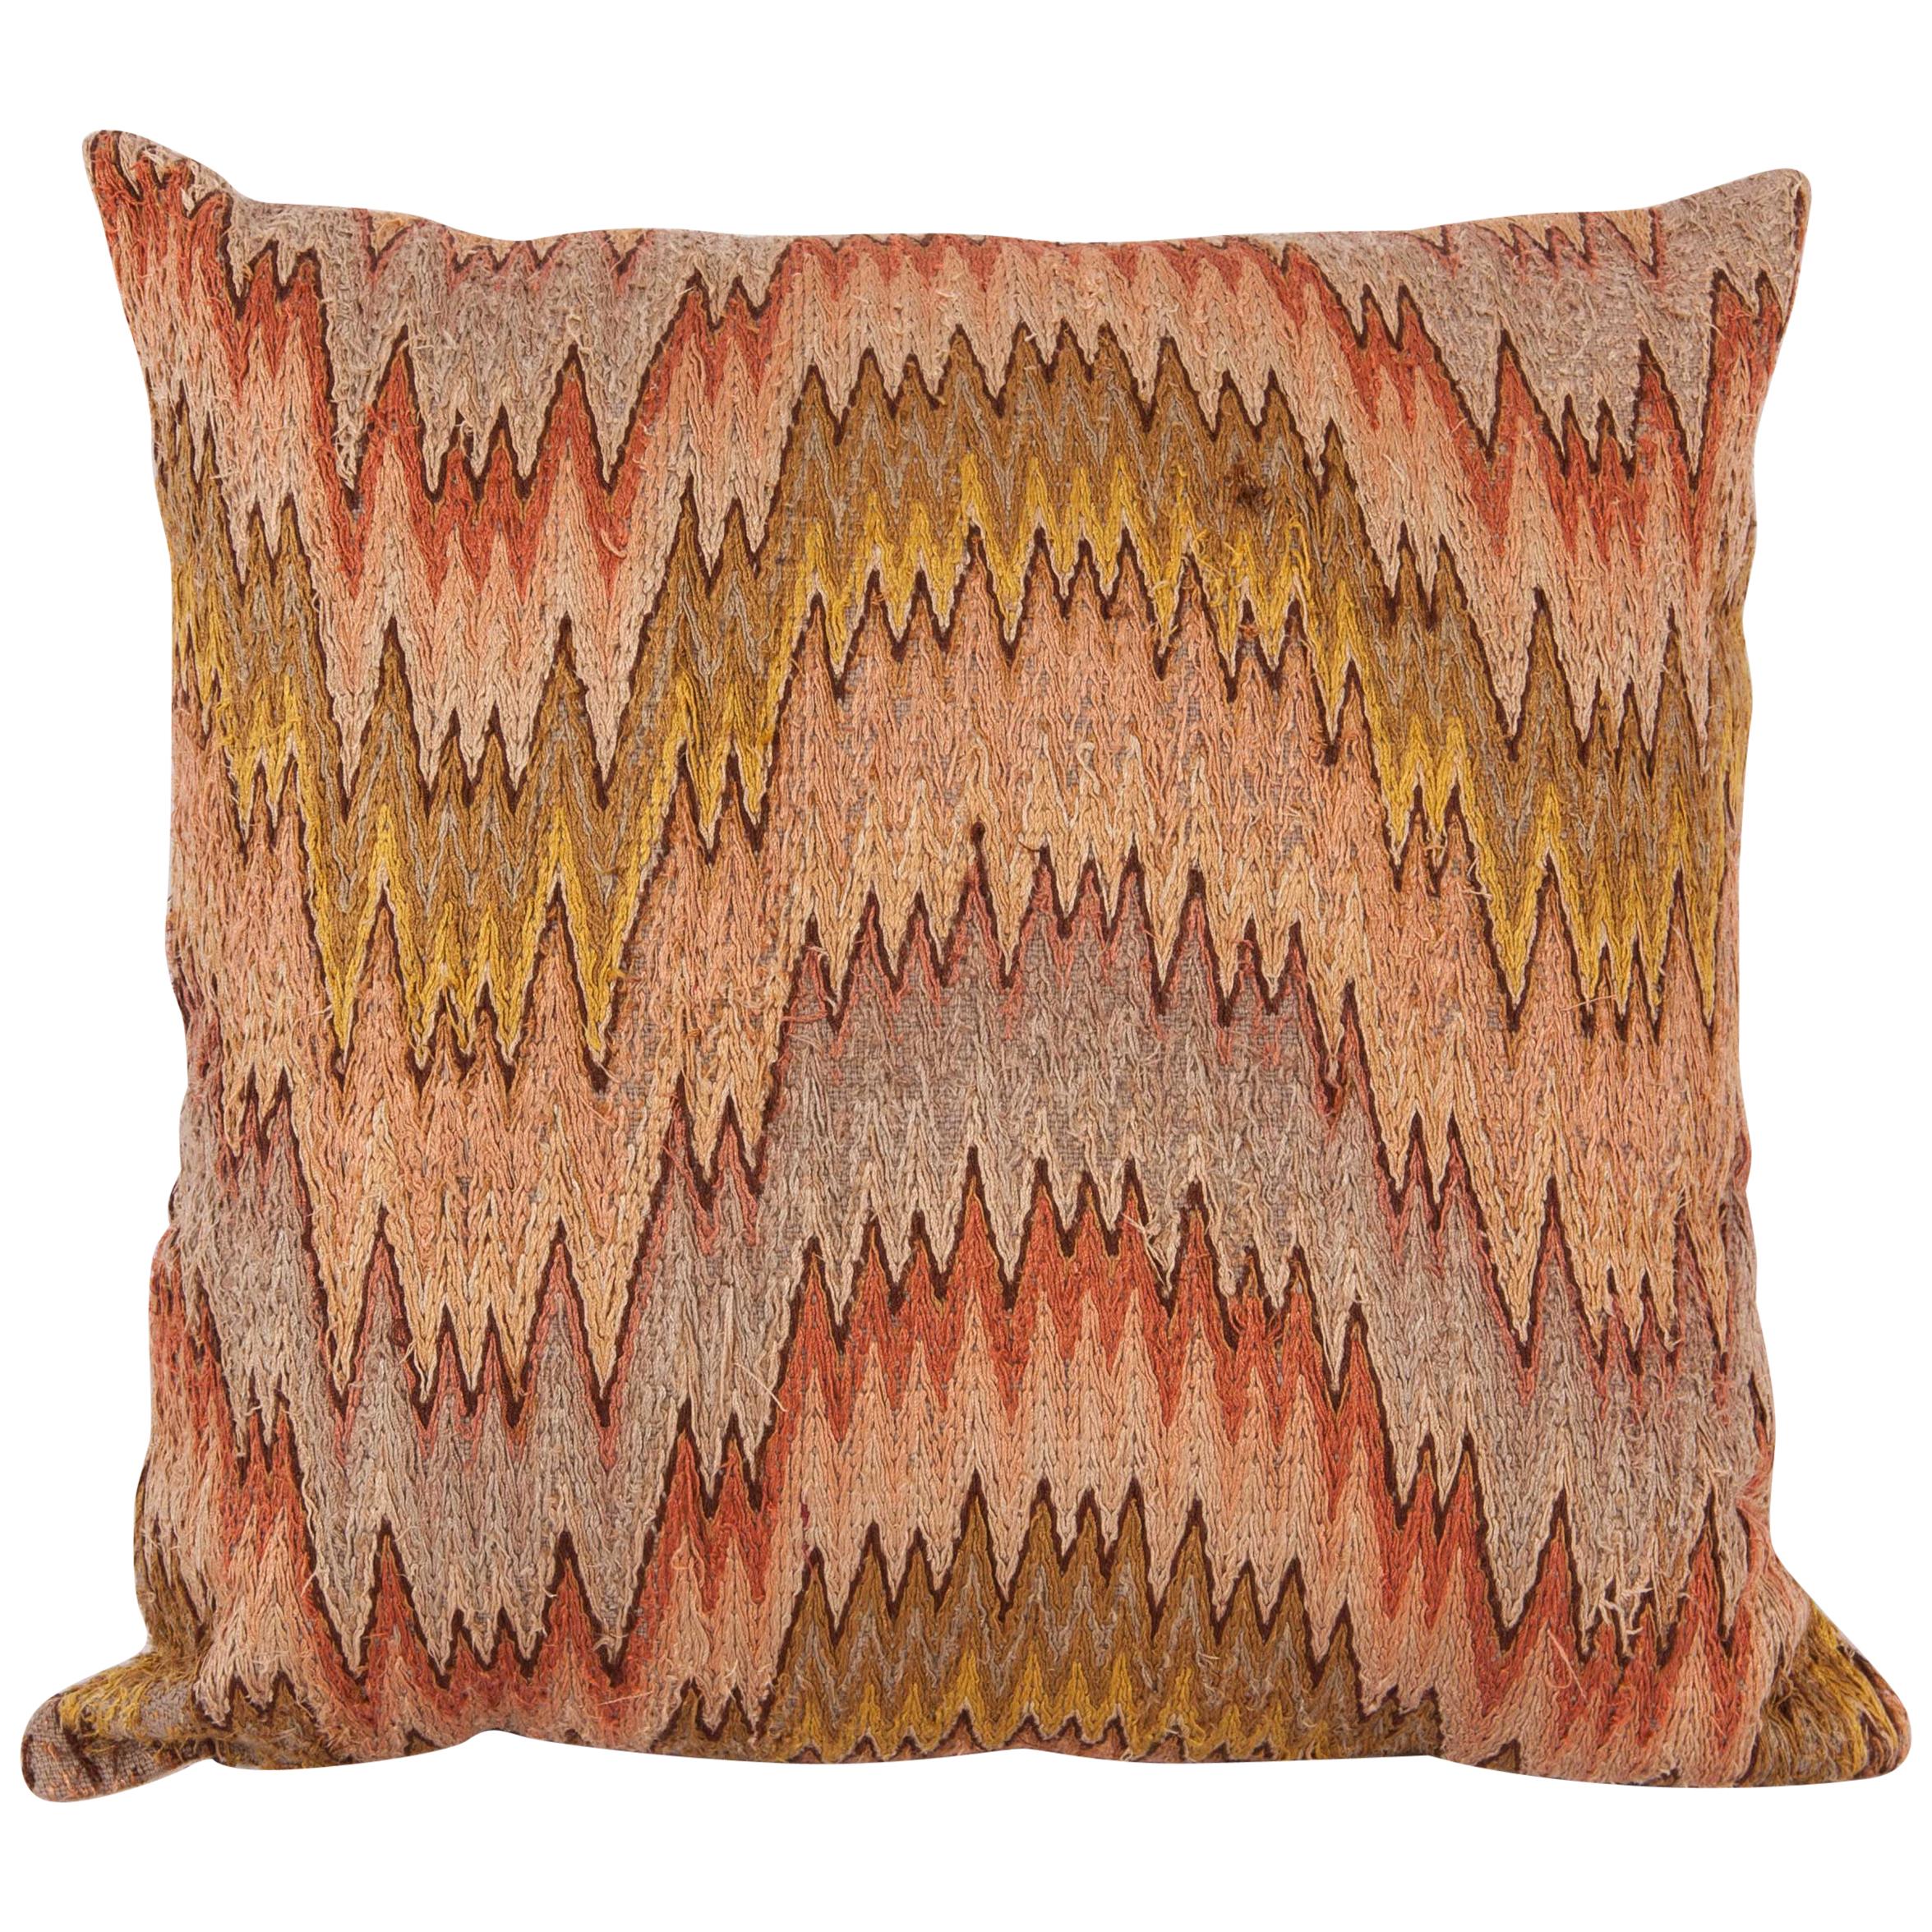 Antique Pillow Made from a 18th-19th Century Italian Bargello Flame Stitch